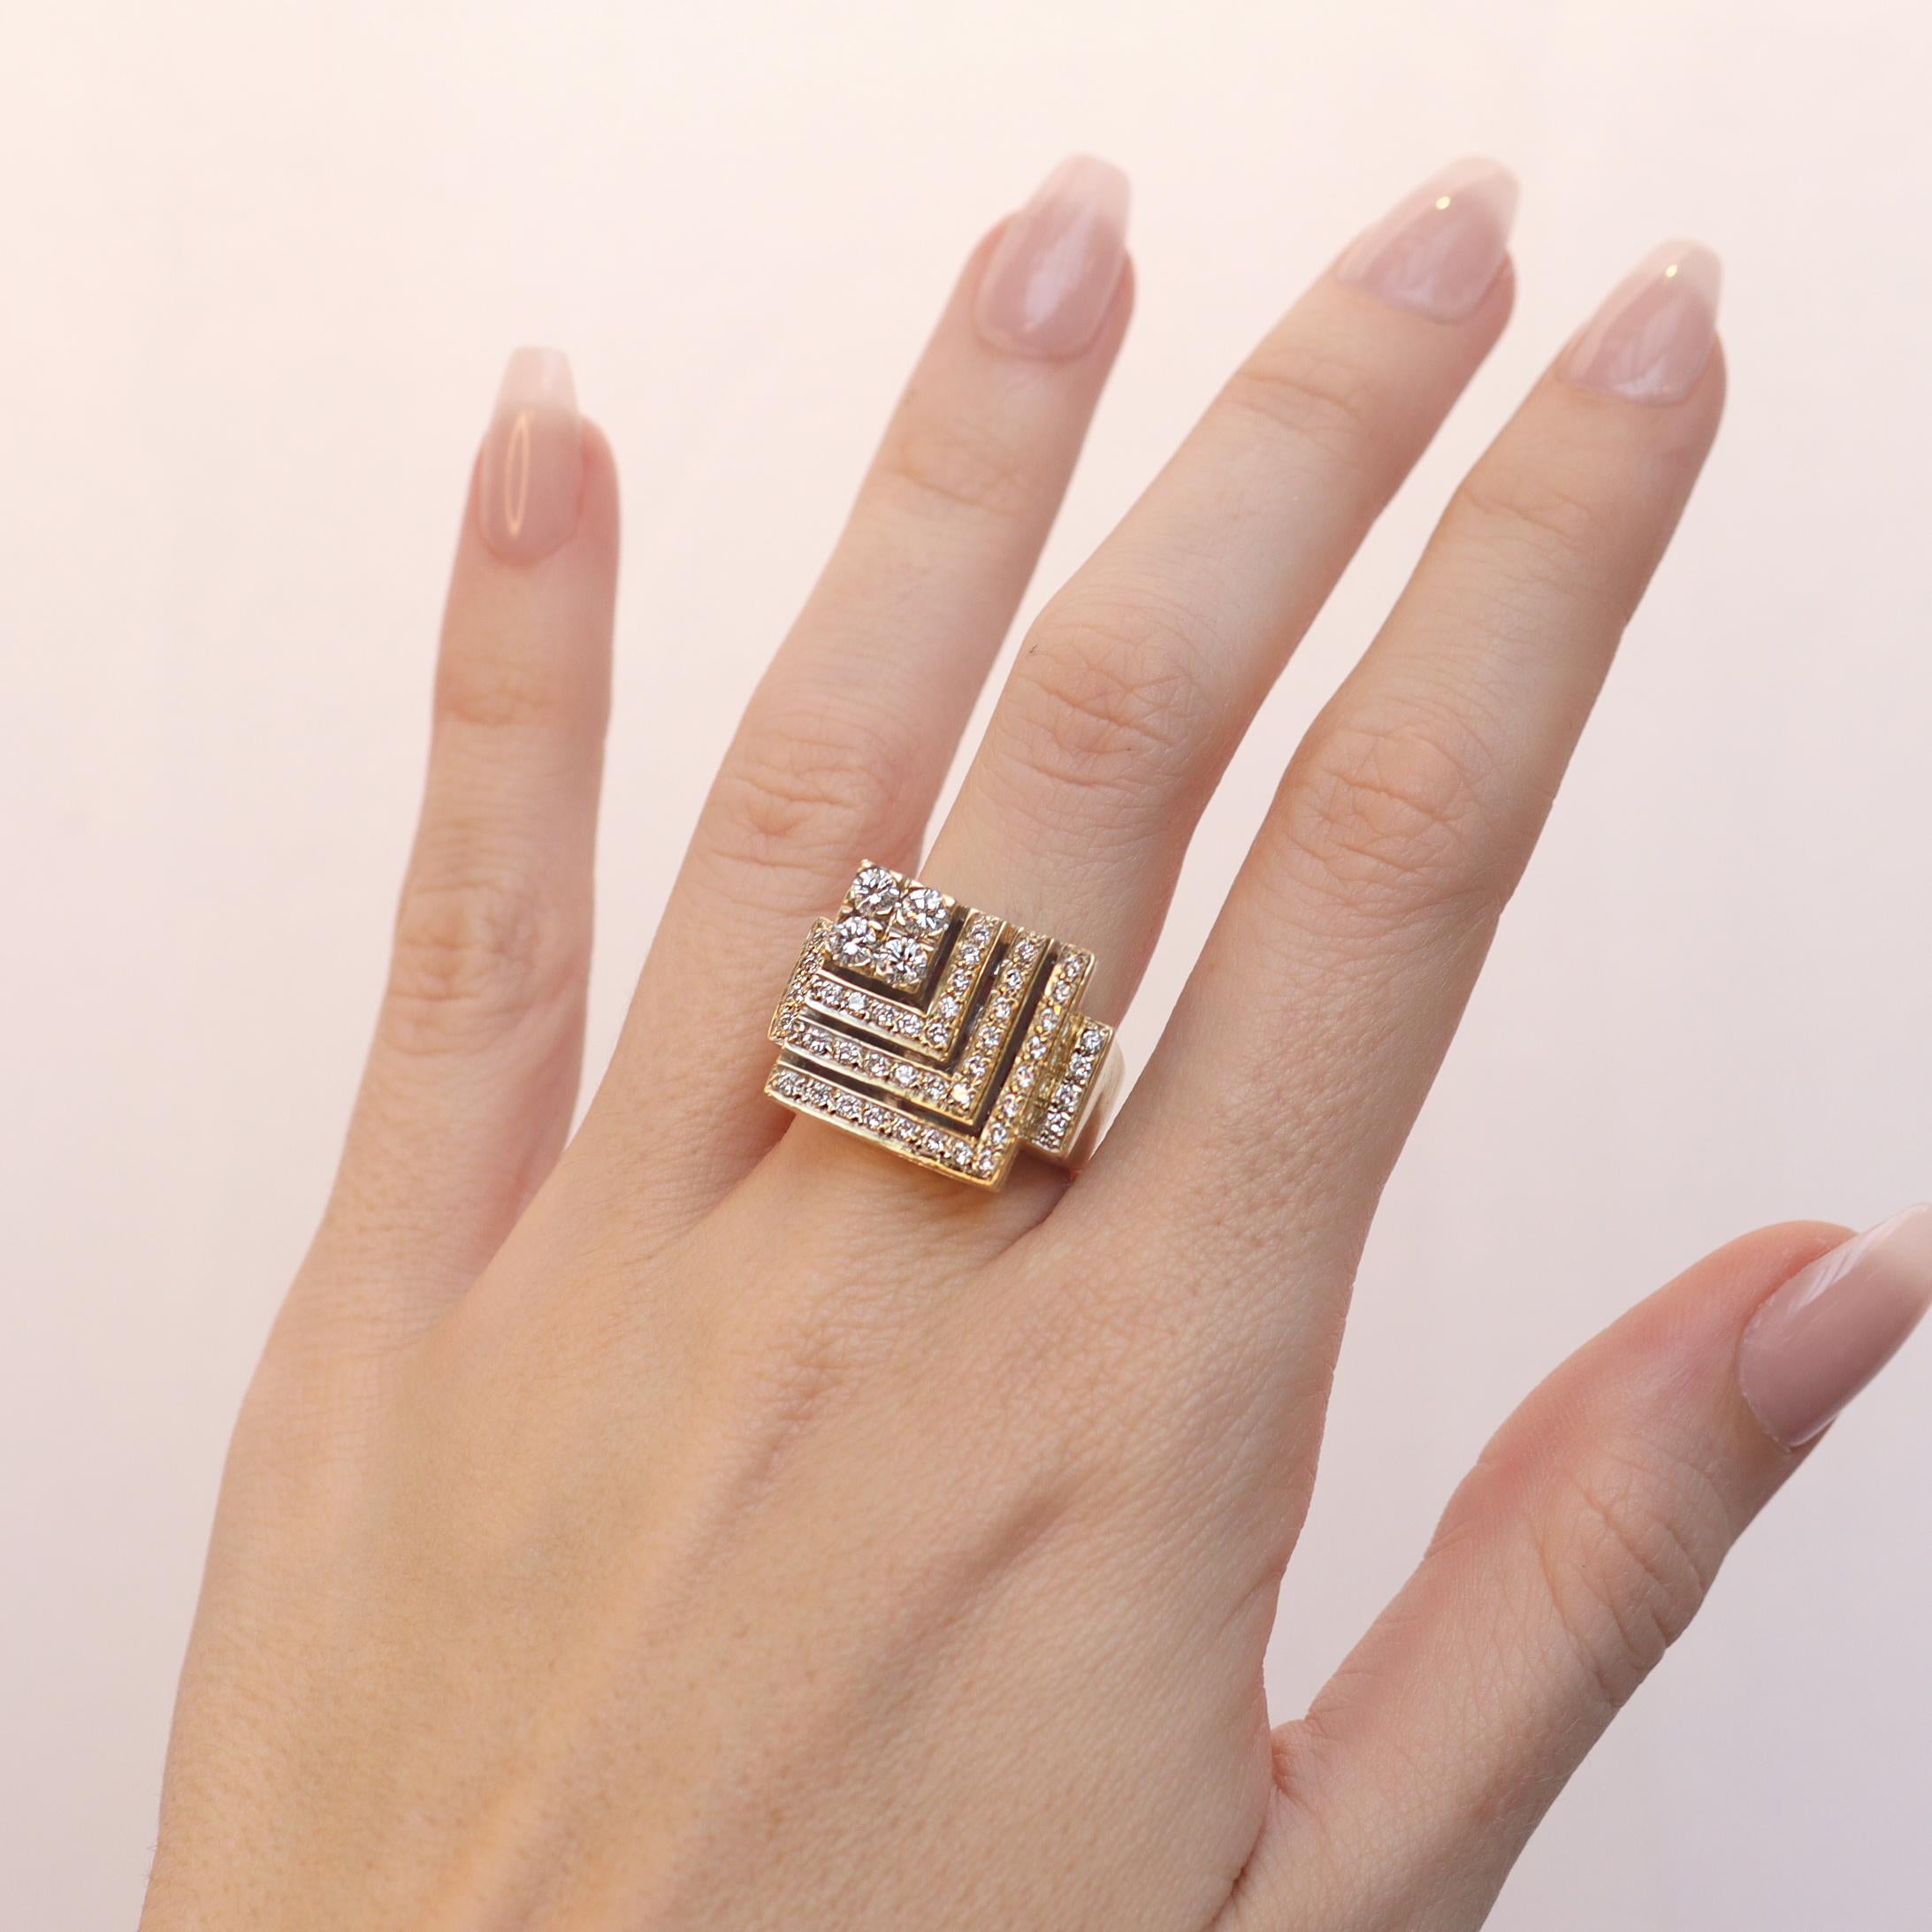 This gorgeous Vintage 18k gold ring is a shining example of timeless geometry! It features two carats of dazzling white diamonds set in a stylish square frame - perfect for making a statement without ever having to say a word. Stand out from the